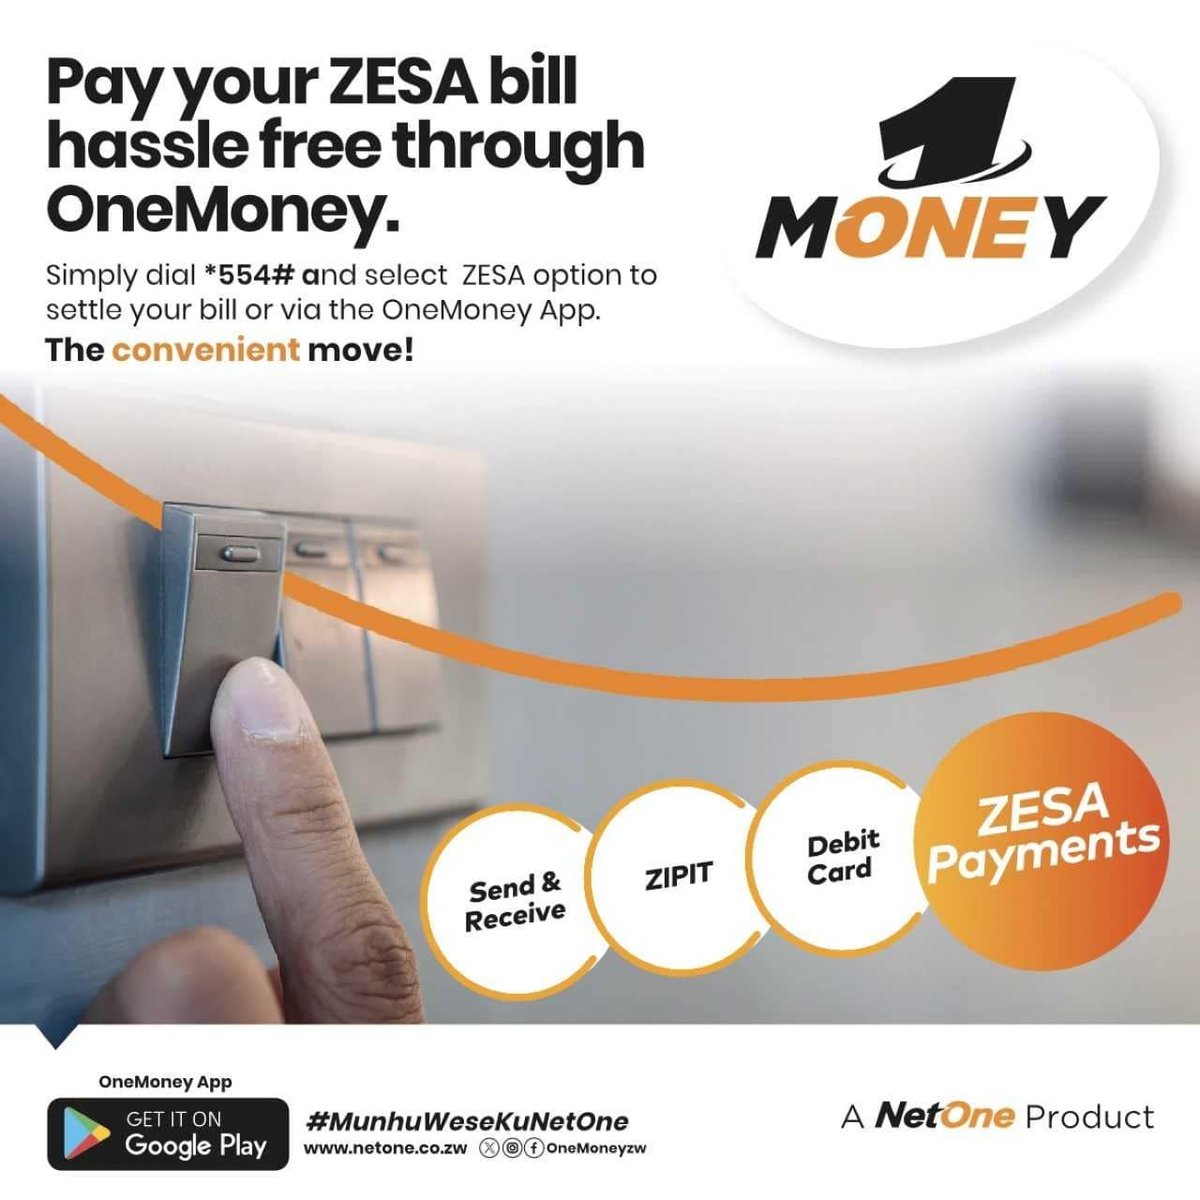 No more enduring darkness when you have a solution at your fingertips! Simply dial *554# and follow the instructions thereafter to get your USD ZESA token. #OneMoney #TheConvenientMovie